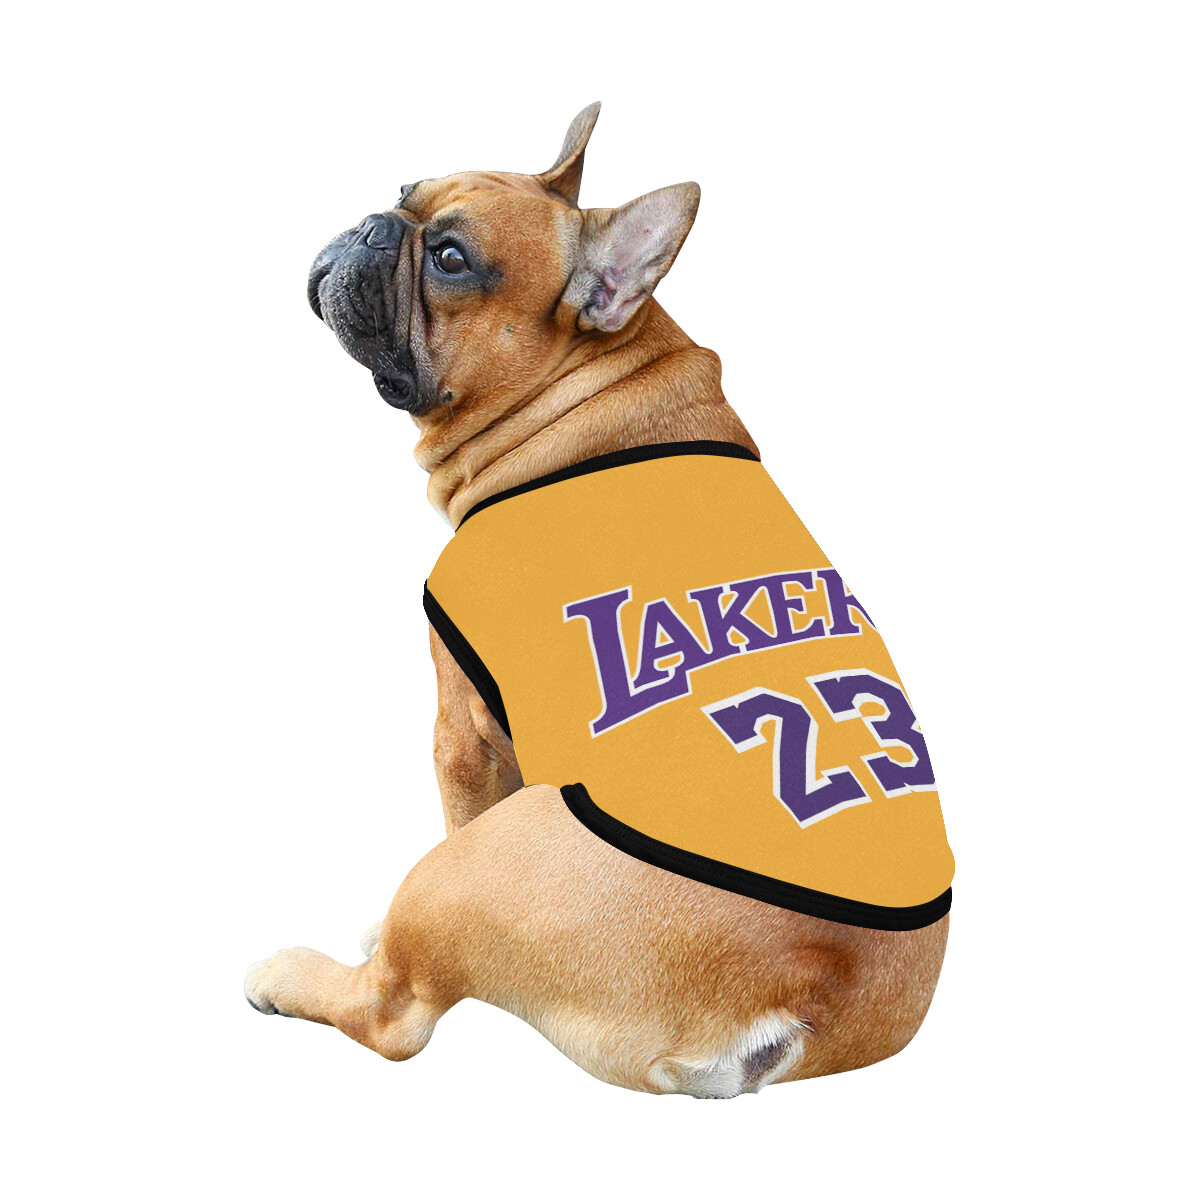 🐕 Lakers Lebron James 23 Dog shirt, Dog Tank Top, Dog t-shirt, Dog clothes, Gifts, front back print, 7 sizes XS to 3XL, dog gifts, yellow